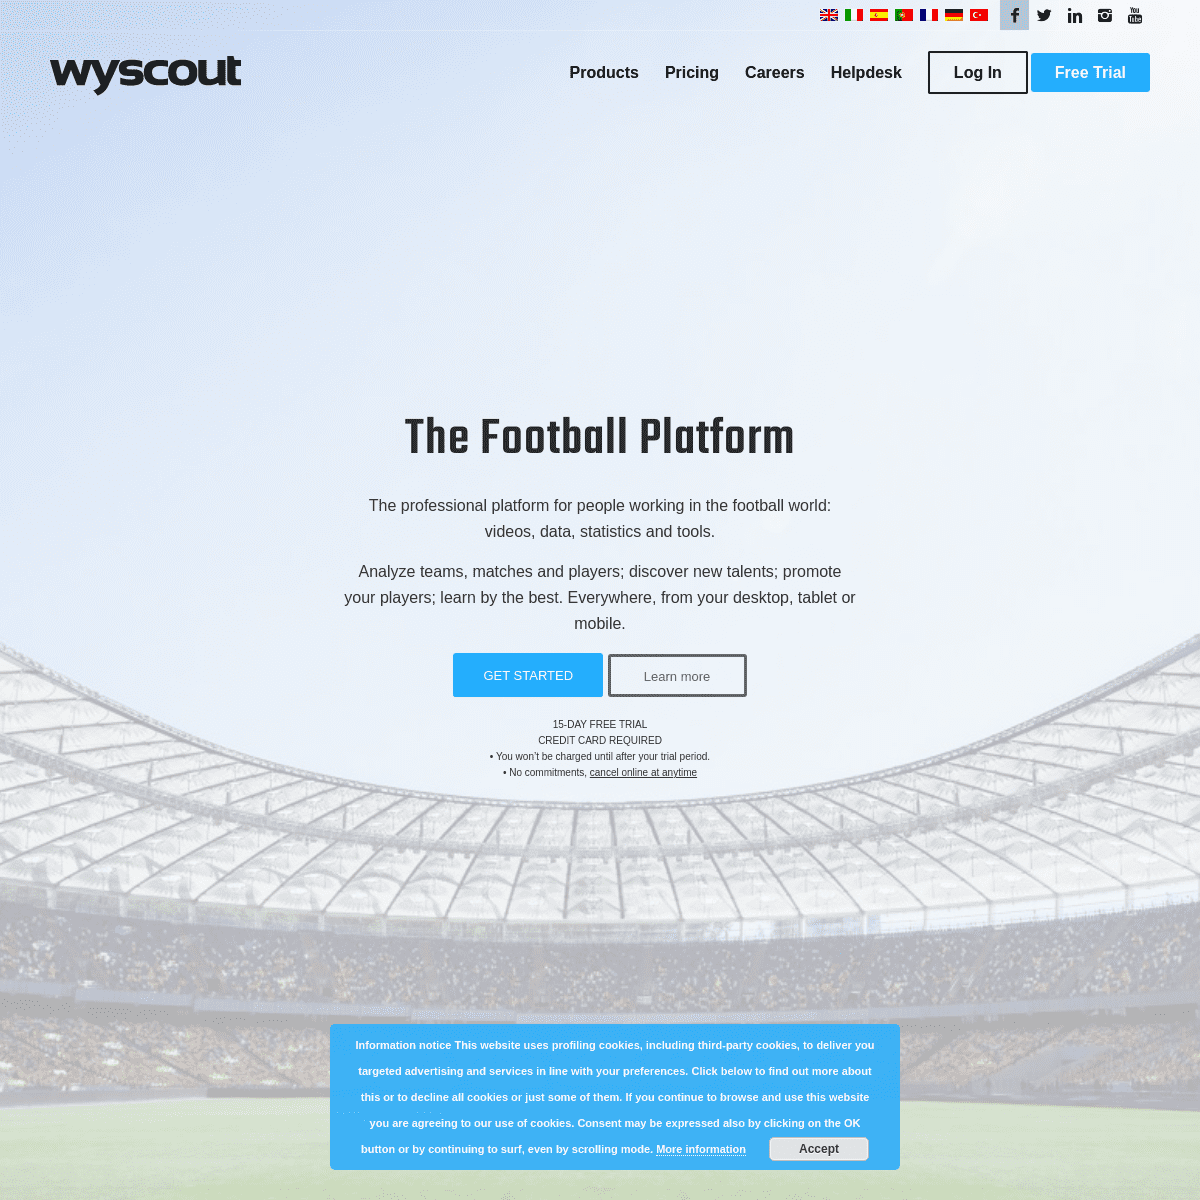 A complete backup of https://wyscout.com